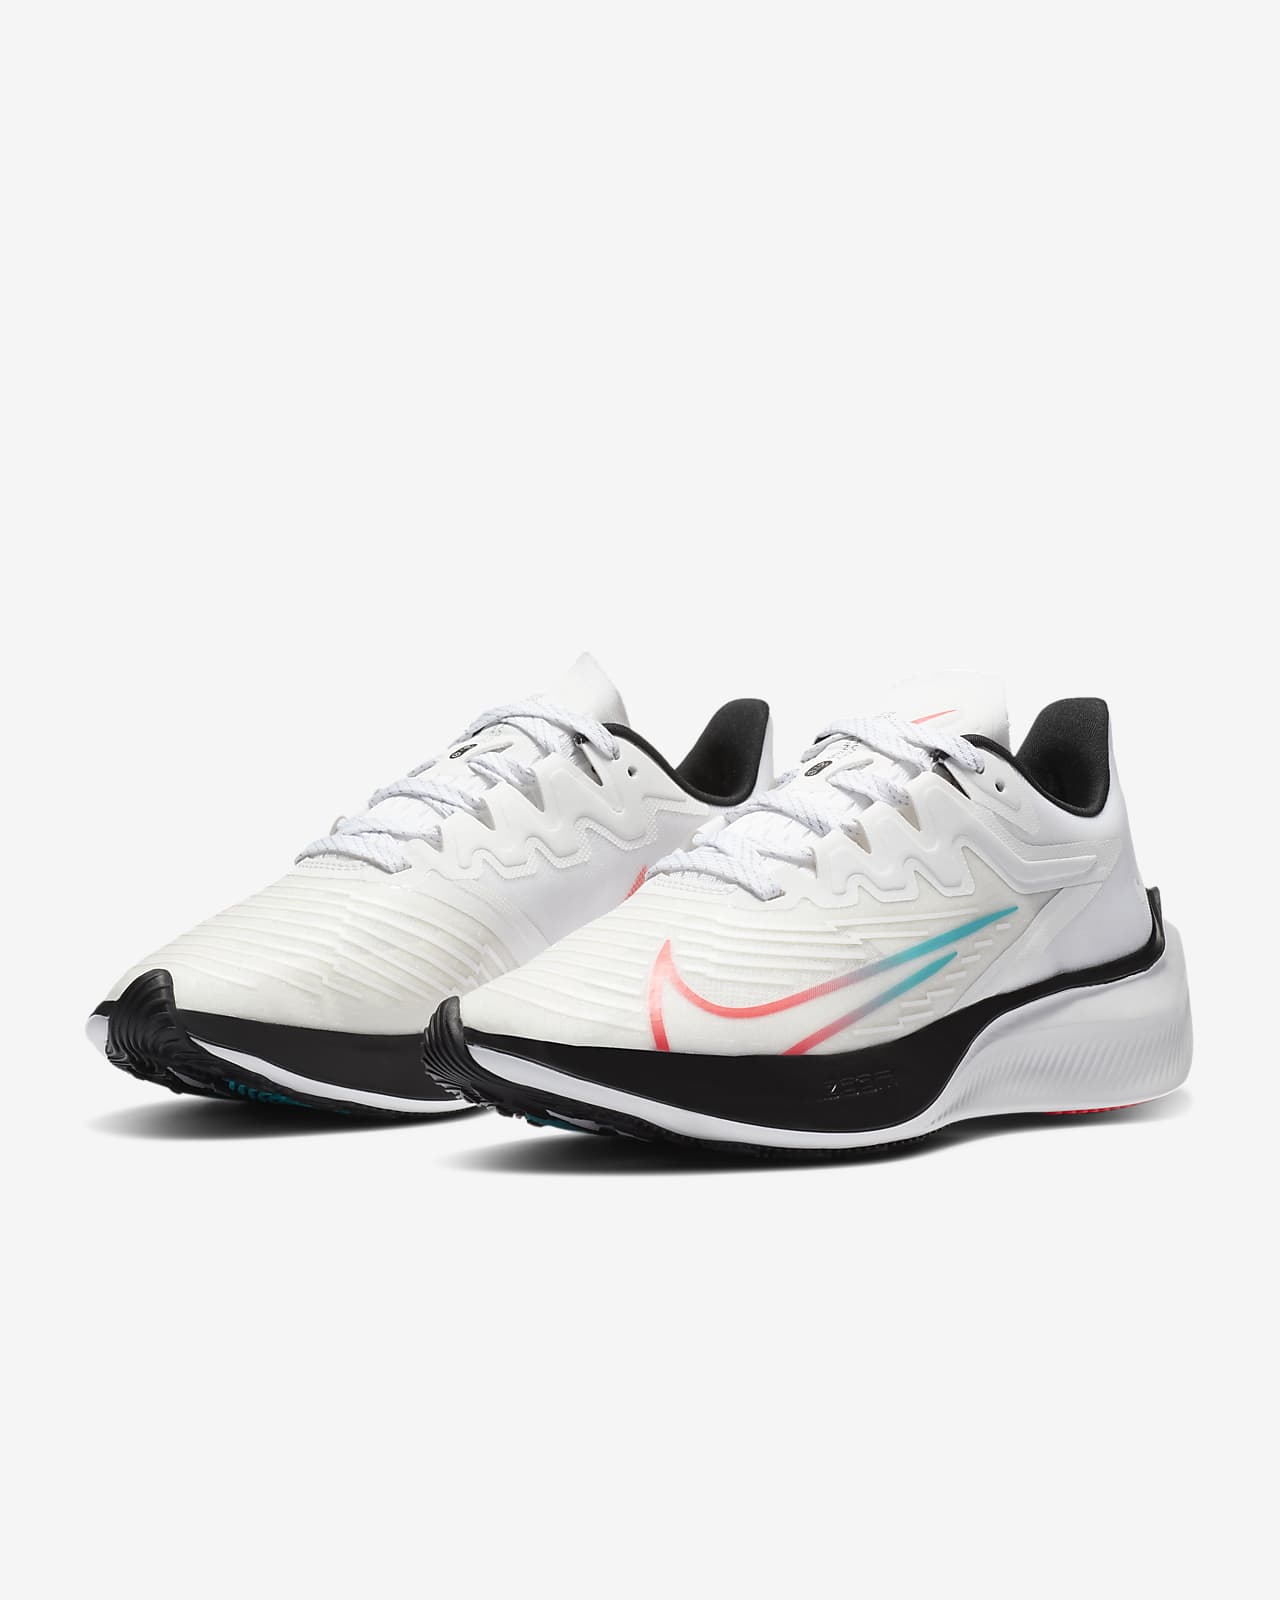 nike zoom gravity 2 review